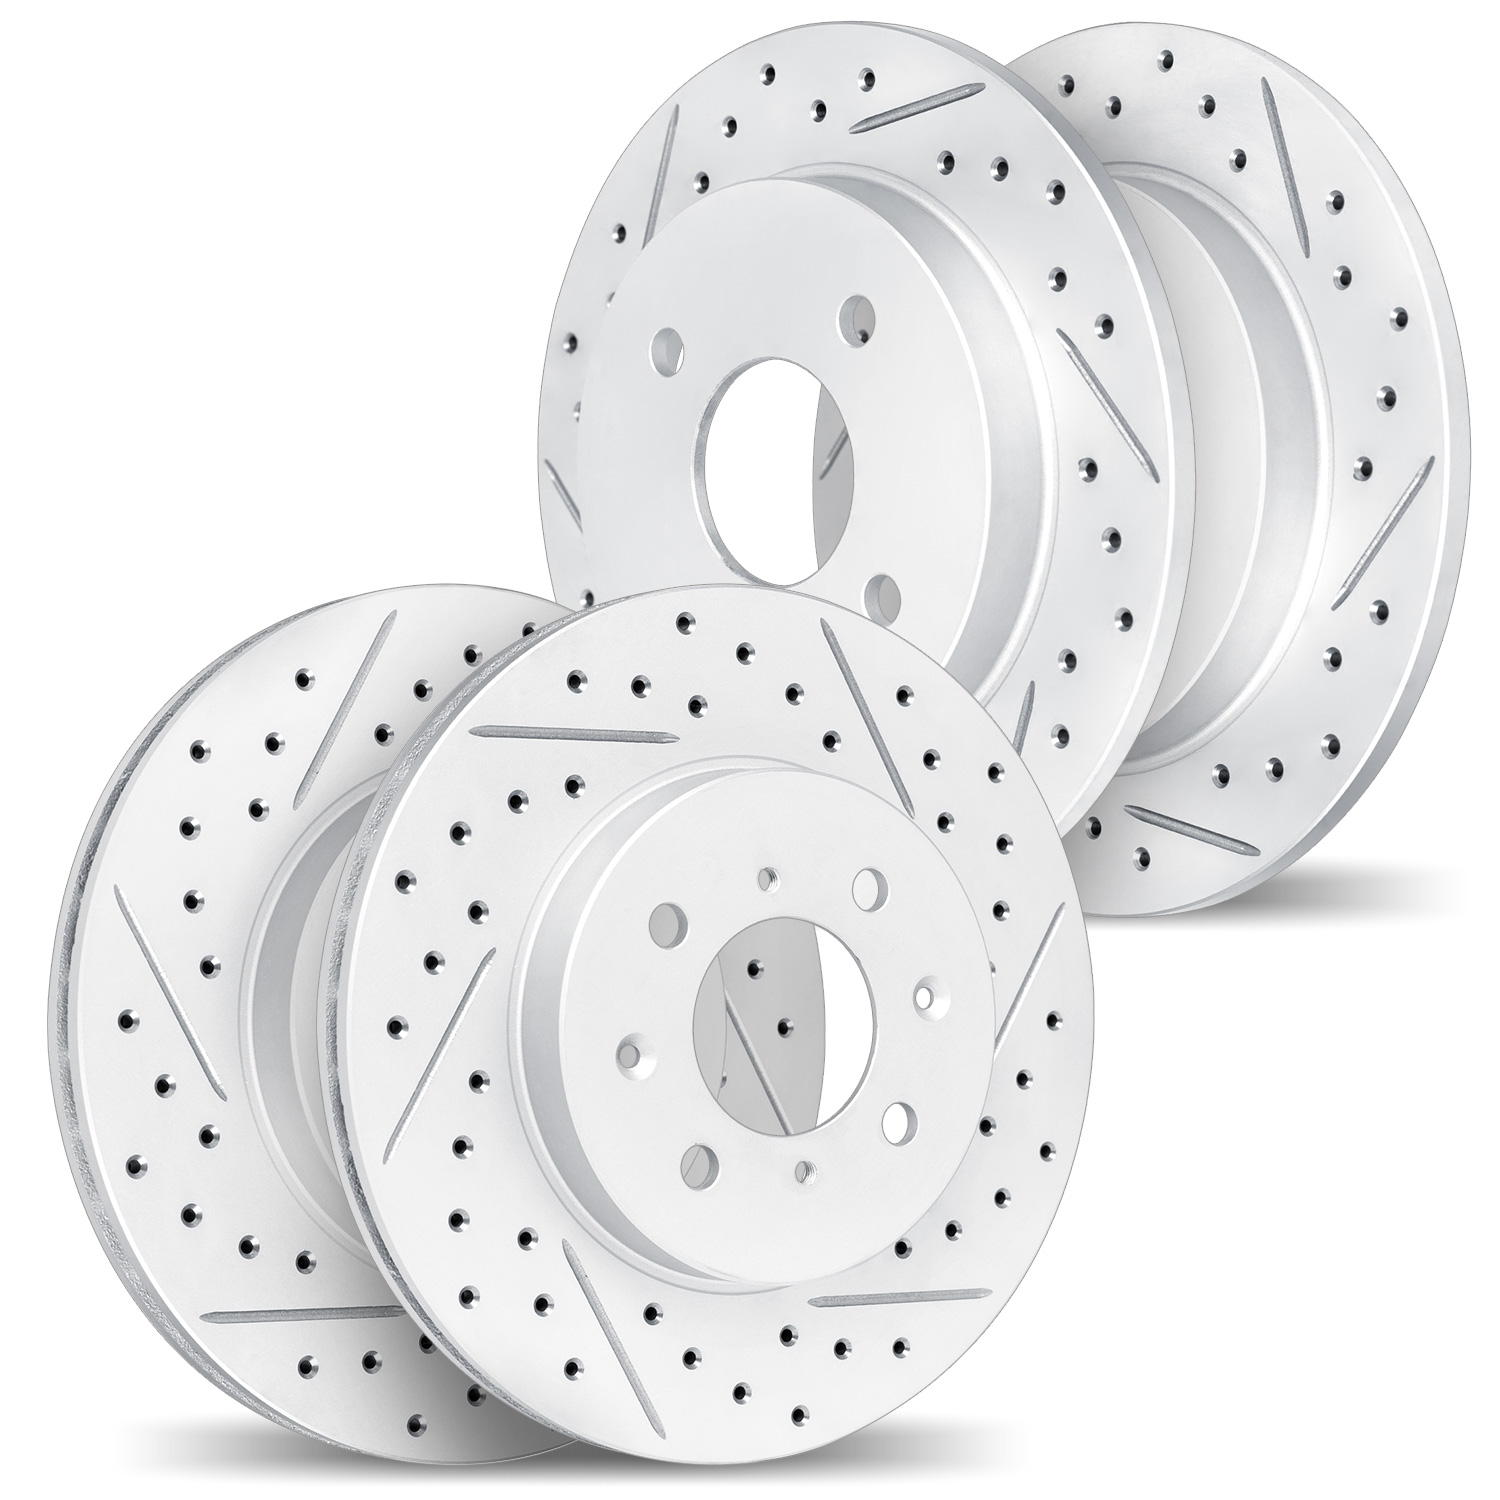 2004-07003 Geoperformance Drilled/Slotted Brake Rotors, 2013-2019 Mopar, Position: Front and Rear